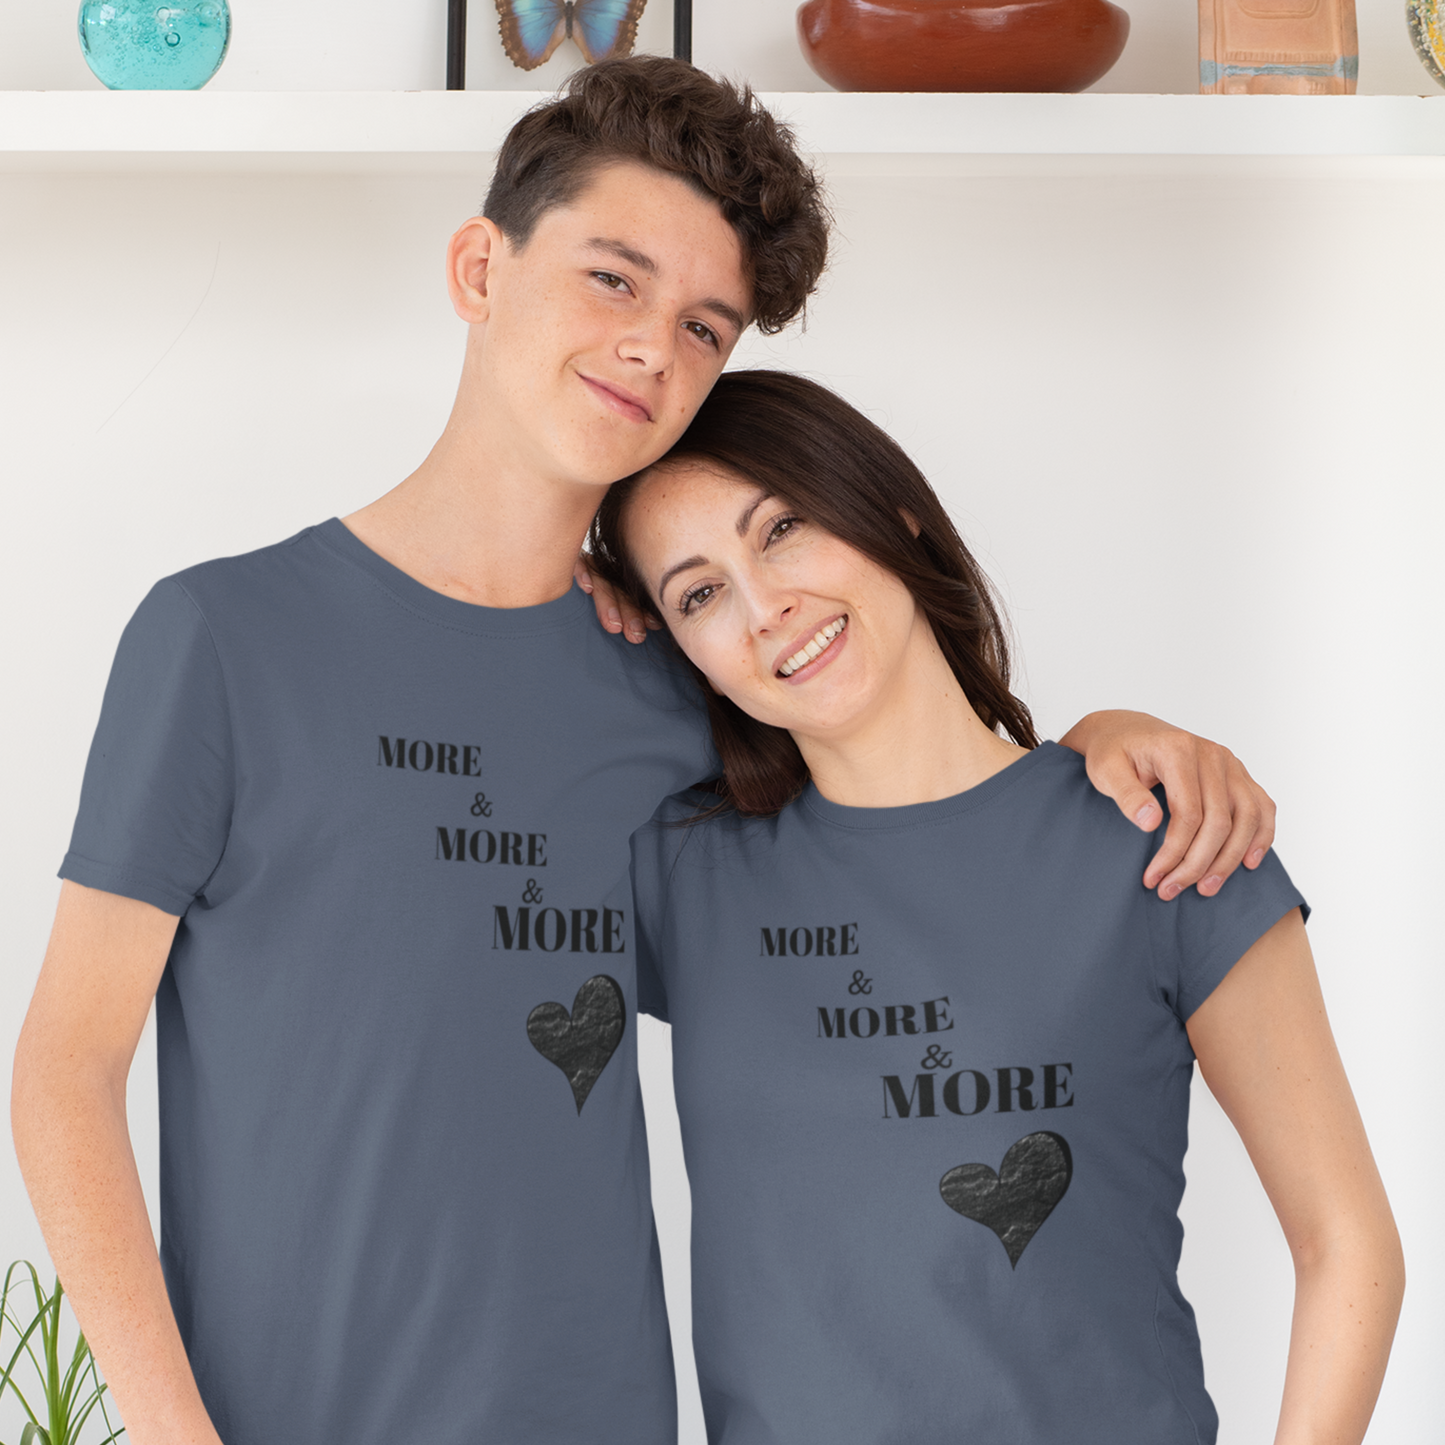 More and more and more love t shirt gift, t shirt gift for love, T shirt gift that celebrates love